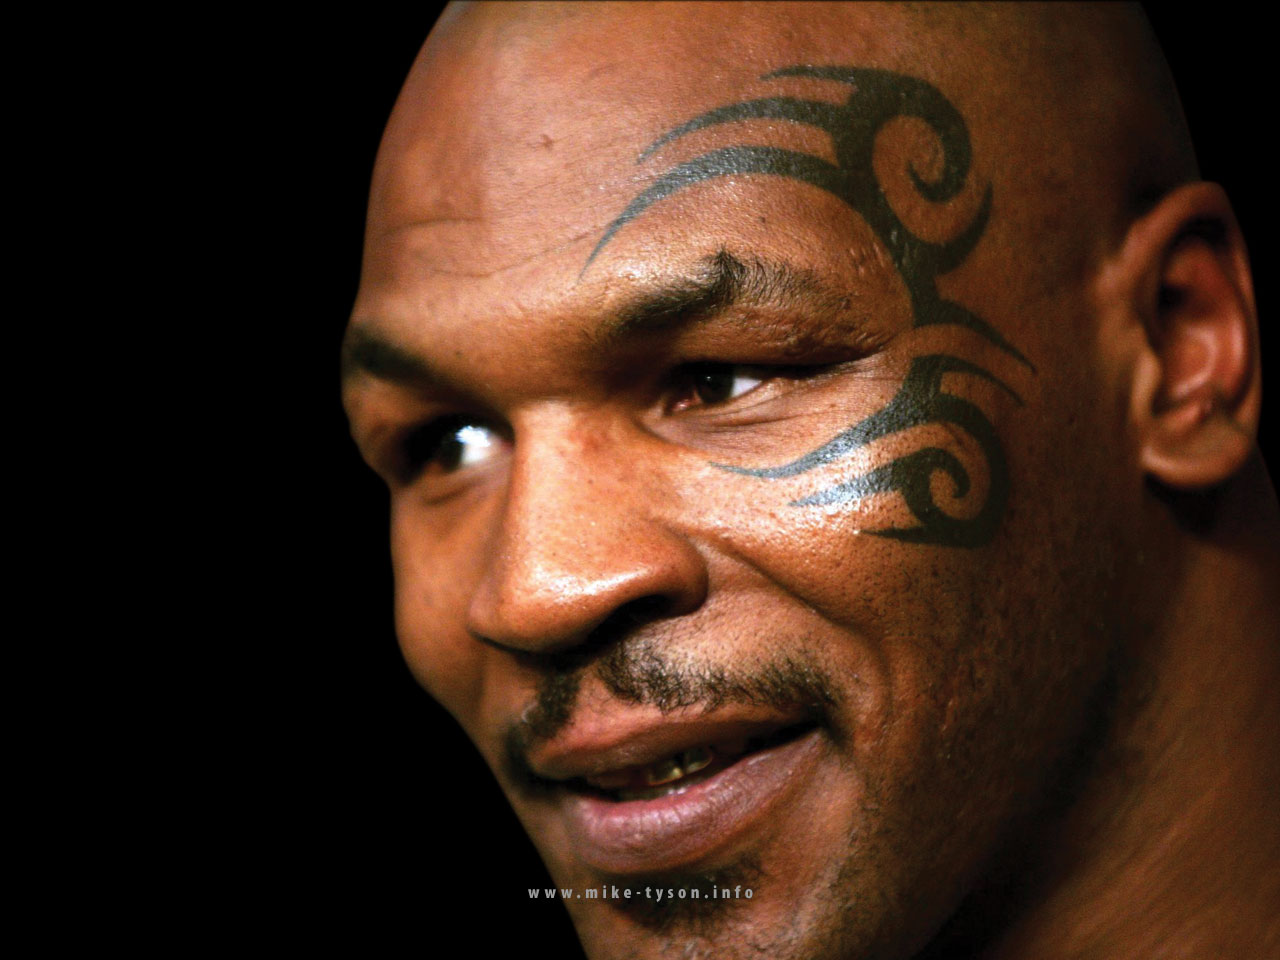 Famous People In The World Mike Tyson Baddest Man On Pla